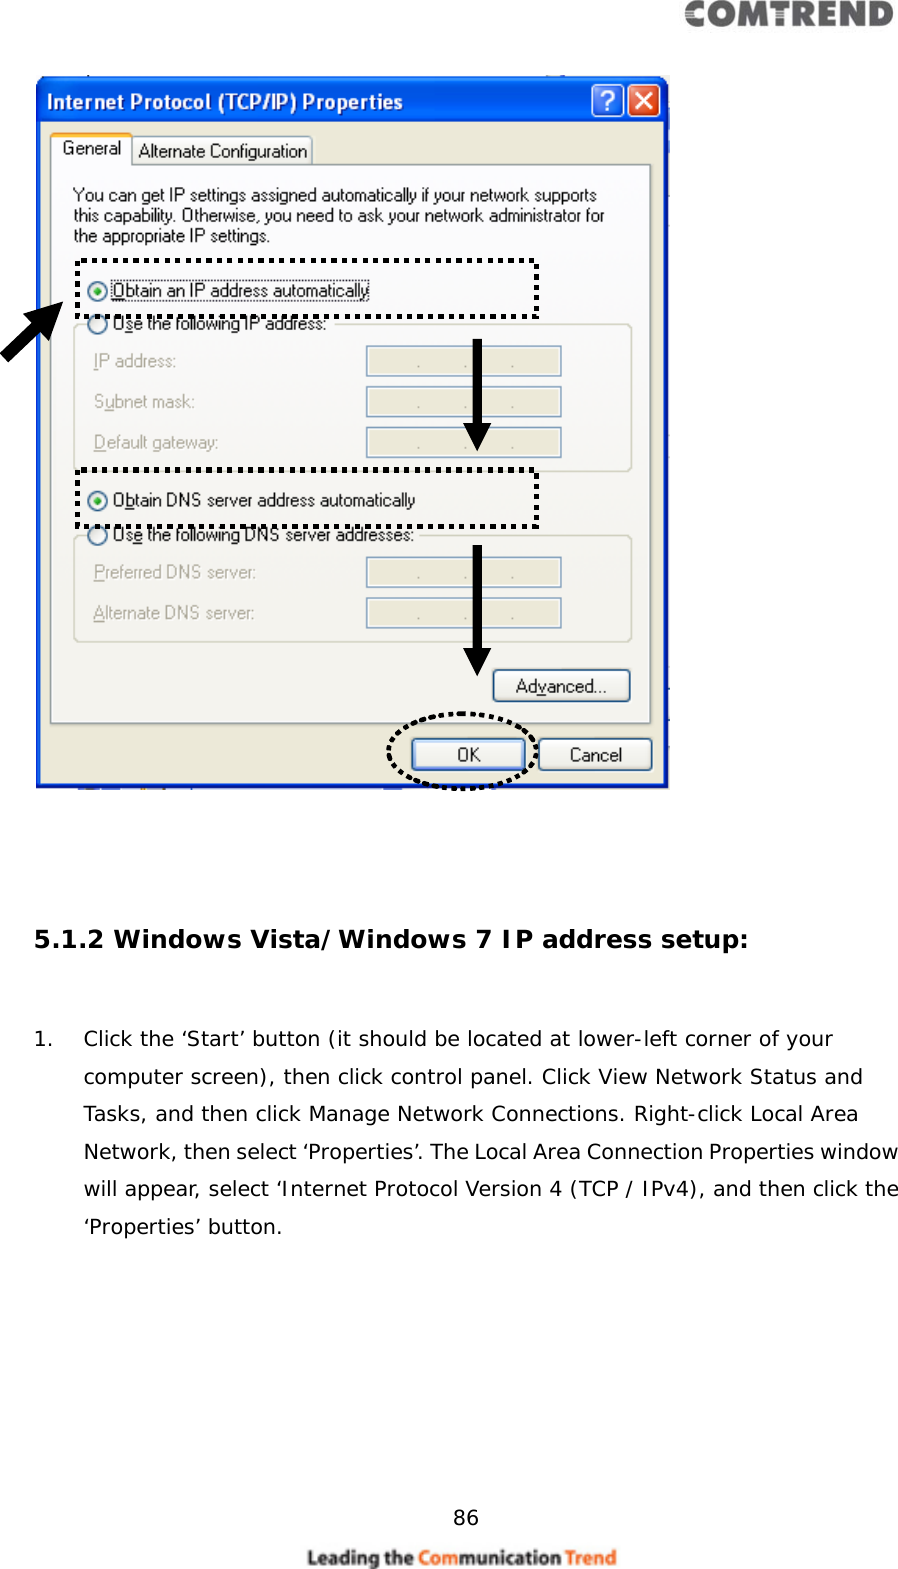     86      5.1.2 Windows Vista/Windows 7 IP address setup:  1. Click the ‘Start’ button (it should be located at lower-left corner of your computer screen), then click control panel. Click View Network Status and Tasks, and then click Manage Network Connections. Right-click Local Area Network, then select ‘Properties’. The Local Area Connection Properties window will appear, select ‘Internet Protocol Version 4 (TCP / IPv4), and then click the ‘Properties’ button.  